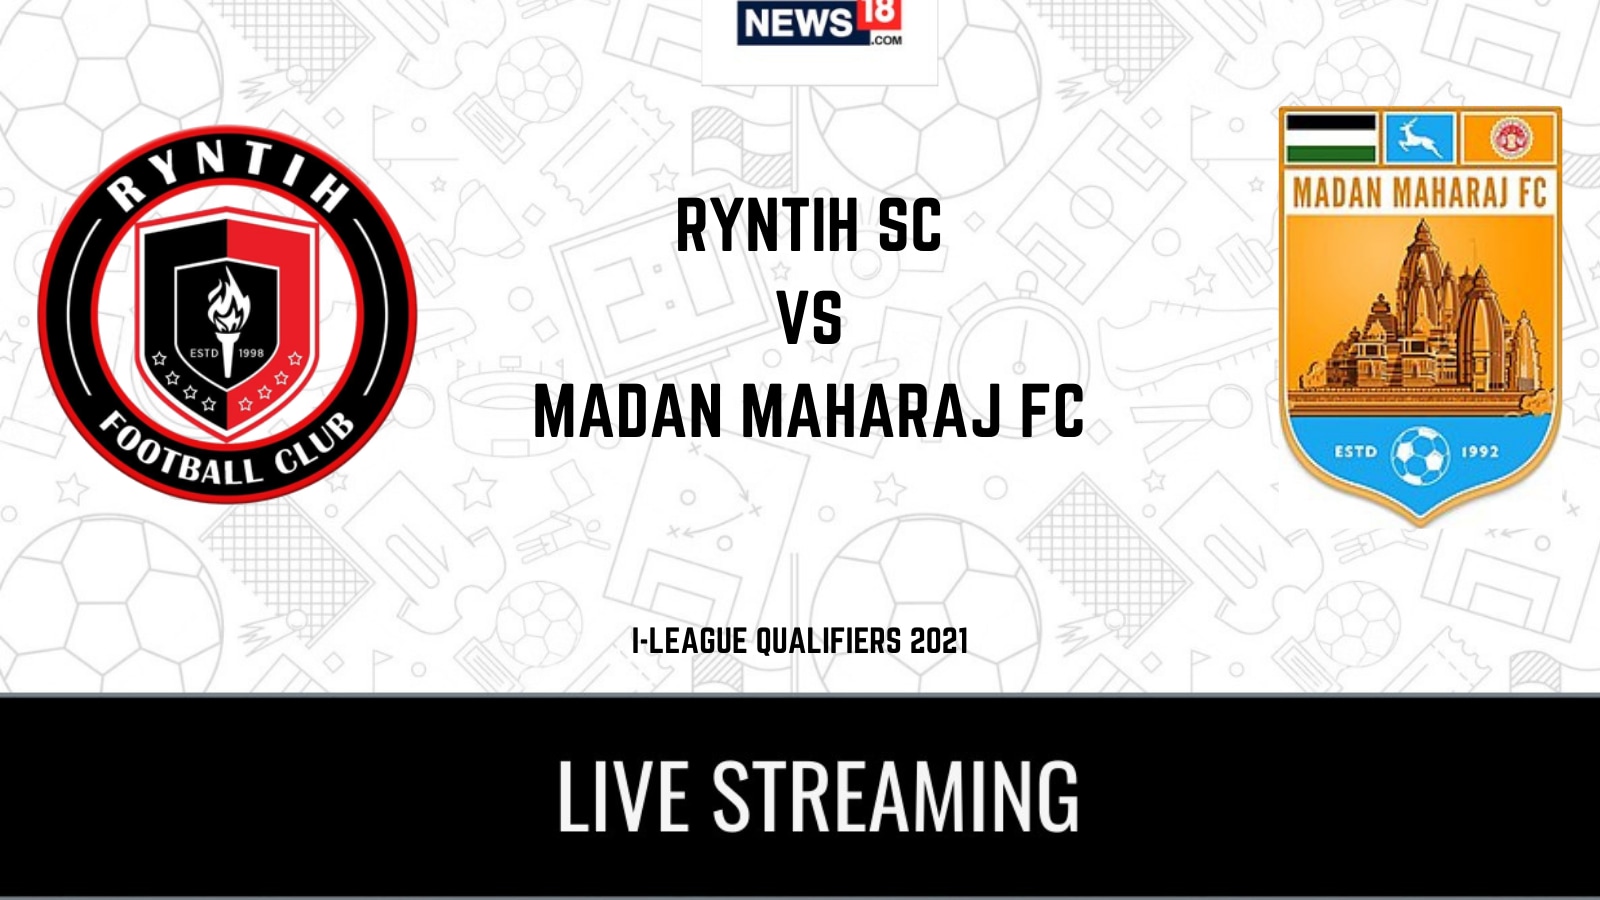 I-League 2021 Qualifiers, Ryntih SC vs Madan Maharaj FC Live Streaming Where to Watch the Online and TV Telecast